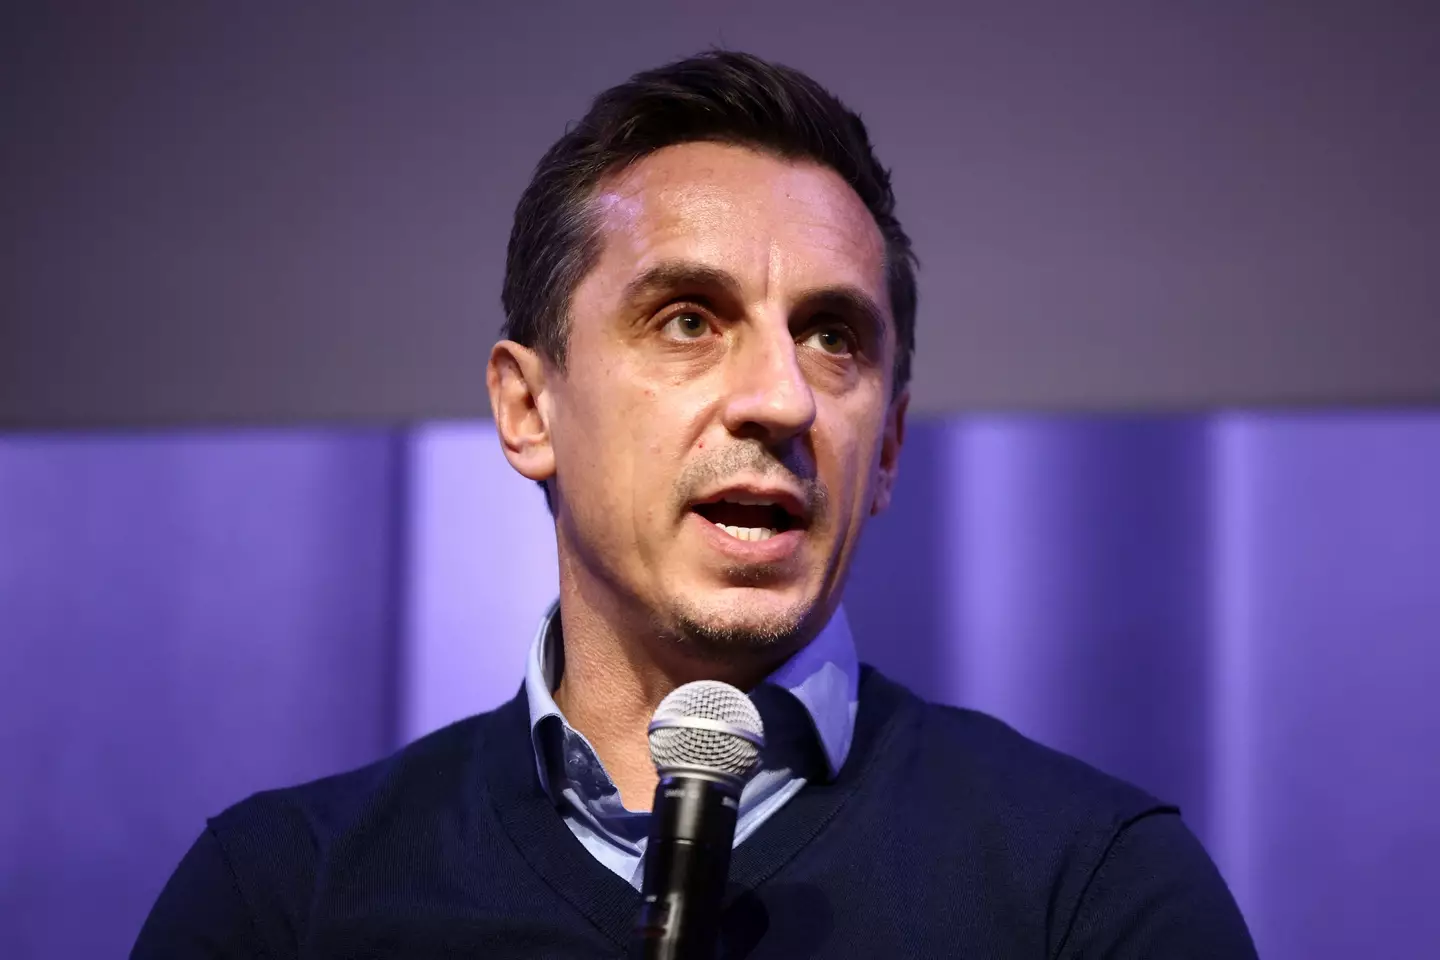 Gary Neville earlier this year.